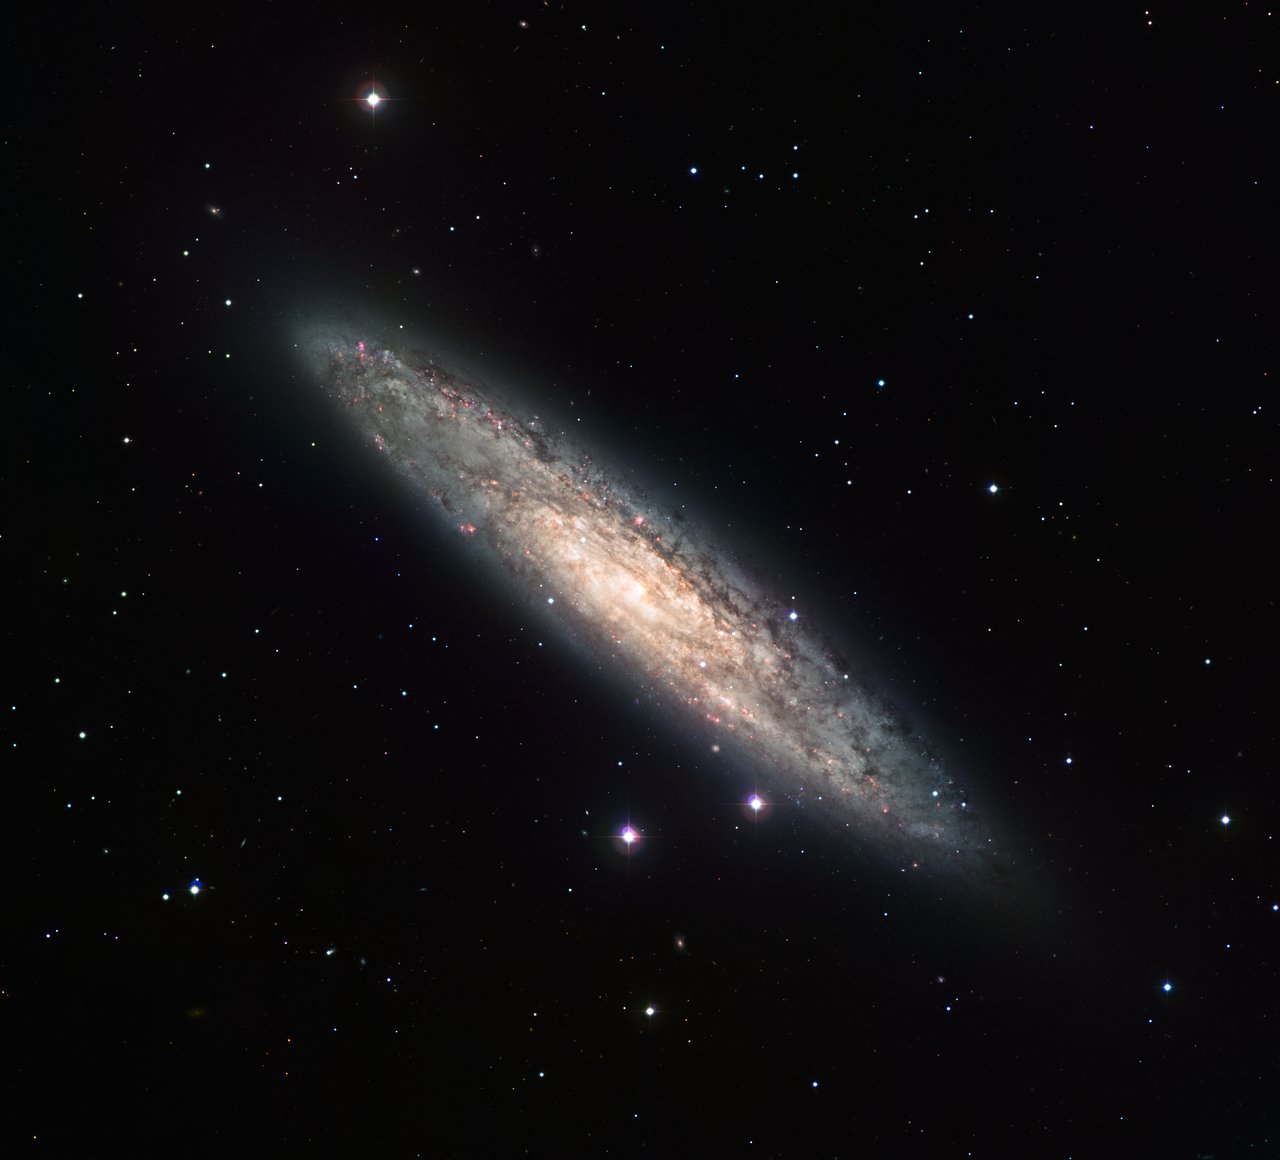 Measuring 70 000 light-years across and laying 13 million light-years away, the nearly edge-on spiral galaxy NGC 253 is revealed here in an image from the Wide Field Imager (WFI) on the MPG/ESO 2.2-metre telescope at the La Silla Observatory. The image is based on data obtained through four different filters (R, V, H-alpha and OIII). North is up and East to the left. The field of view is 30 arcminutes.